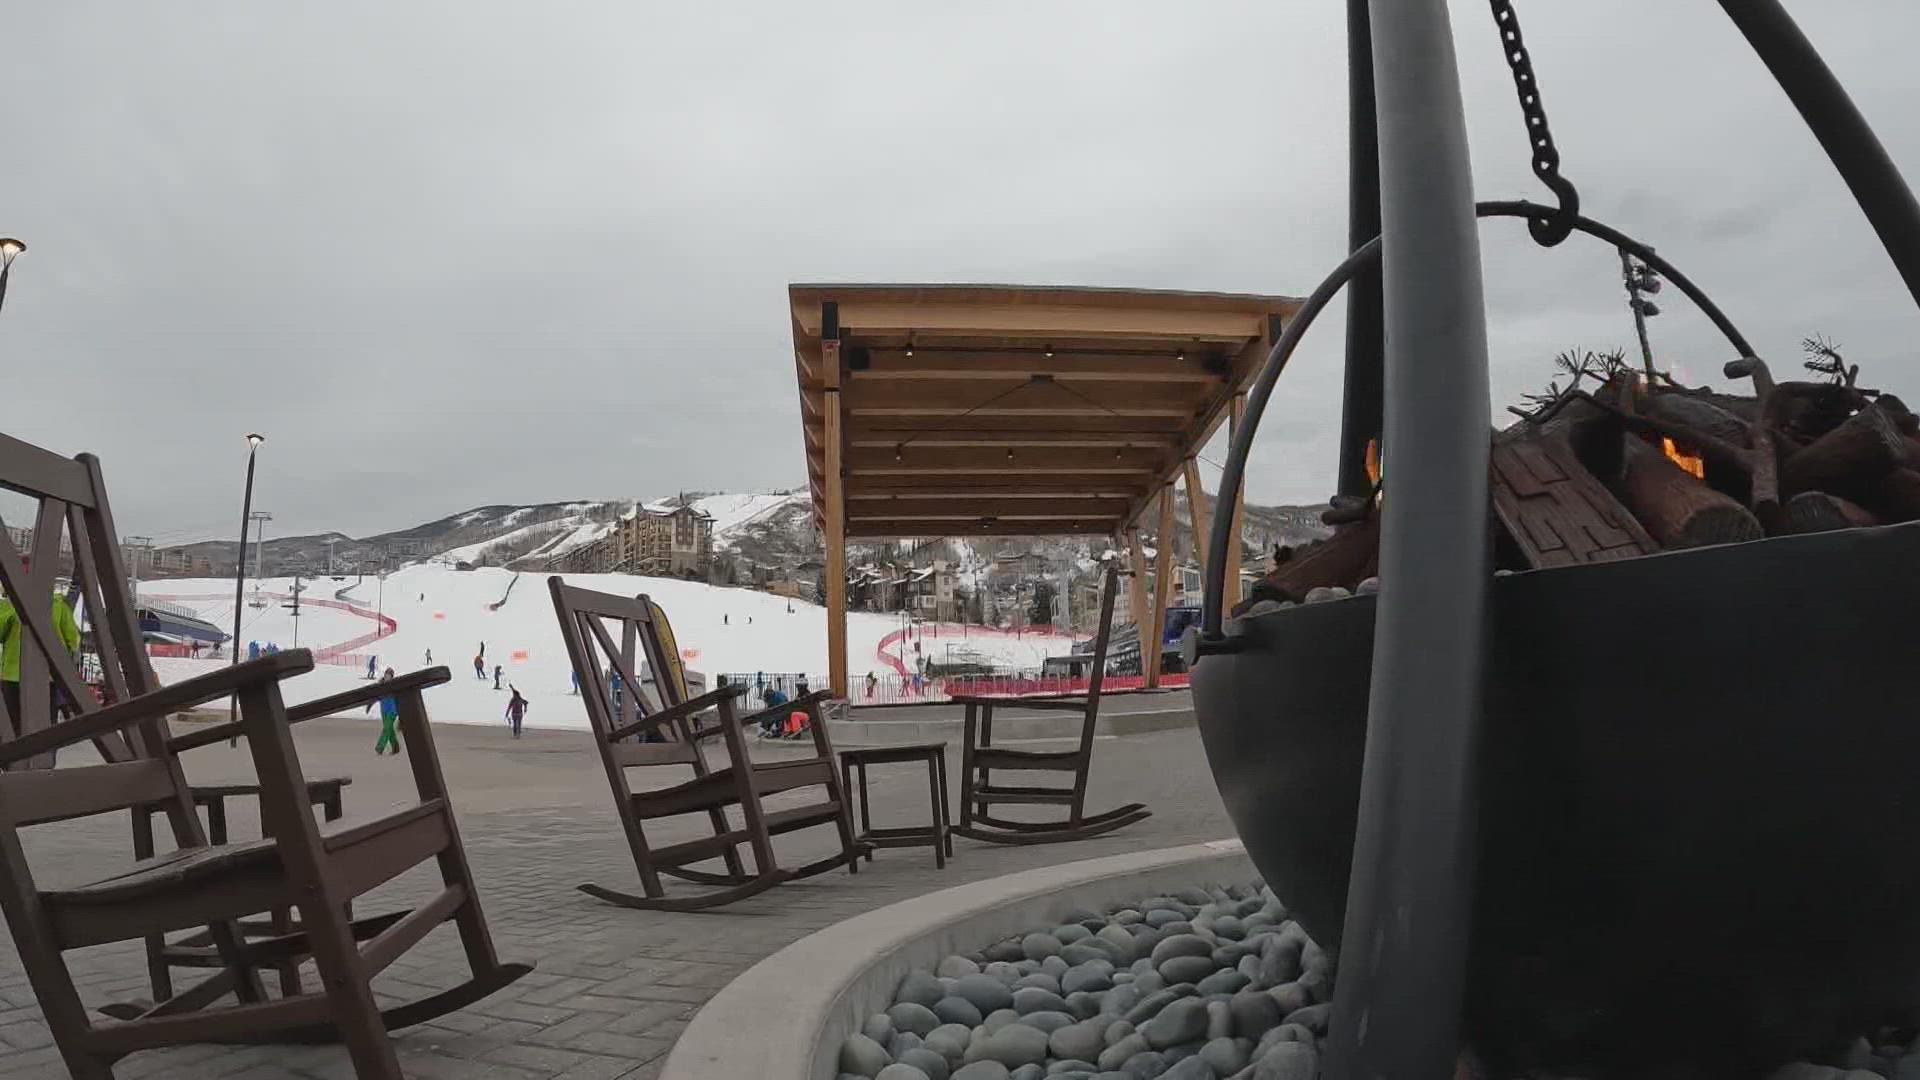 The base area at Steamboat Resort now has an ice rink, new gondola, outdoor stage and eventually a food hall to heat up the ski season.